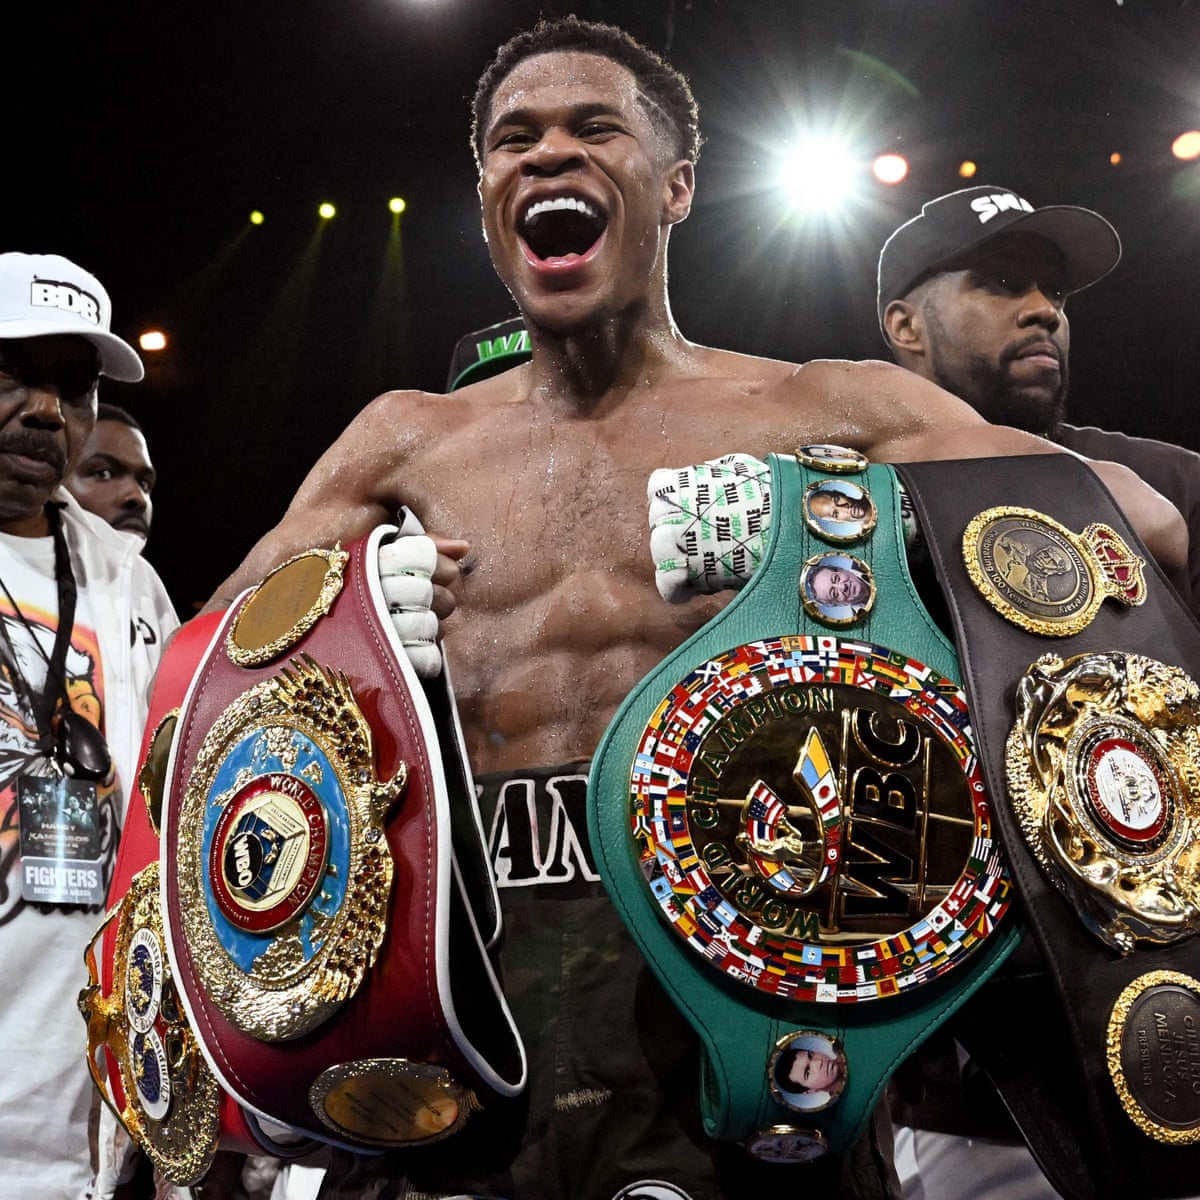 Devin Haney outclasses Kambosos once more to retain unified lightweight title | Boxing | The Guardian